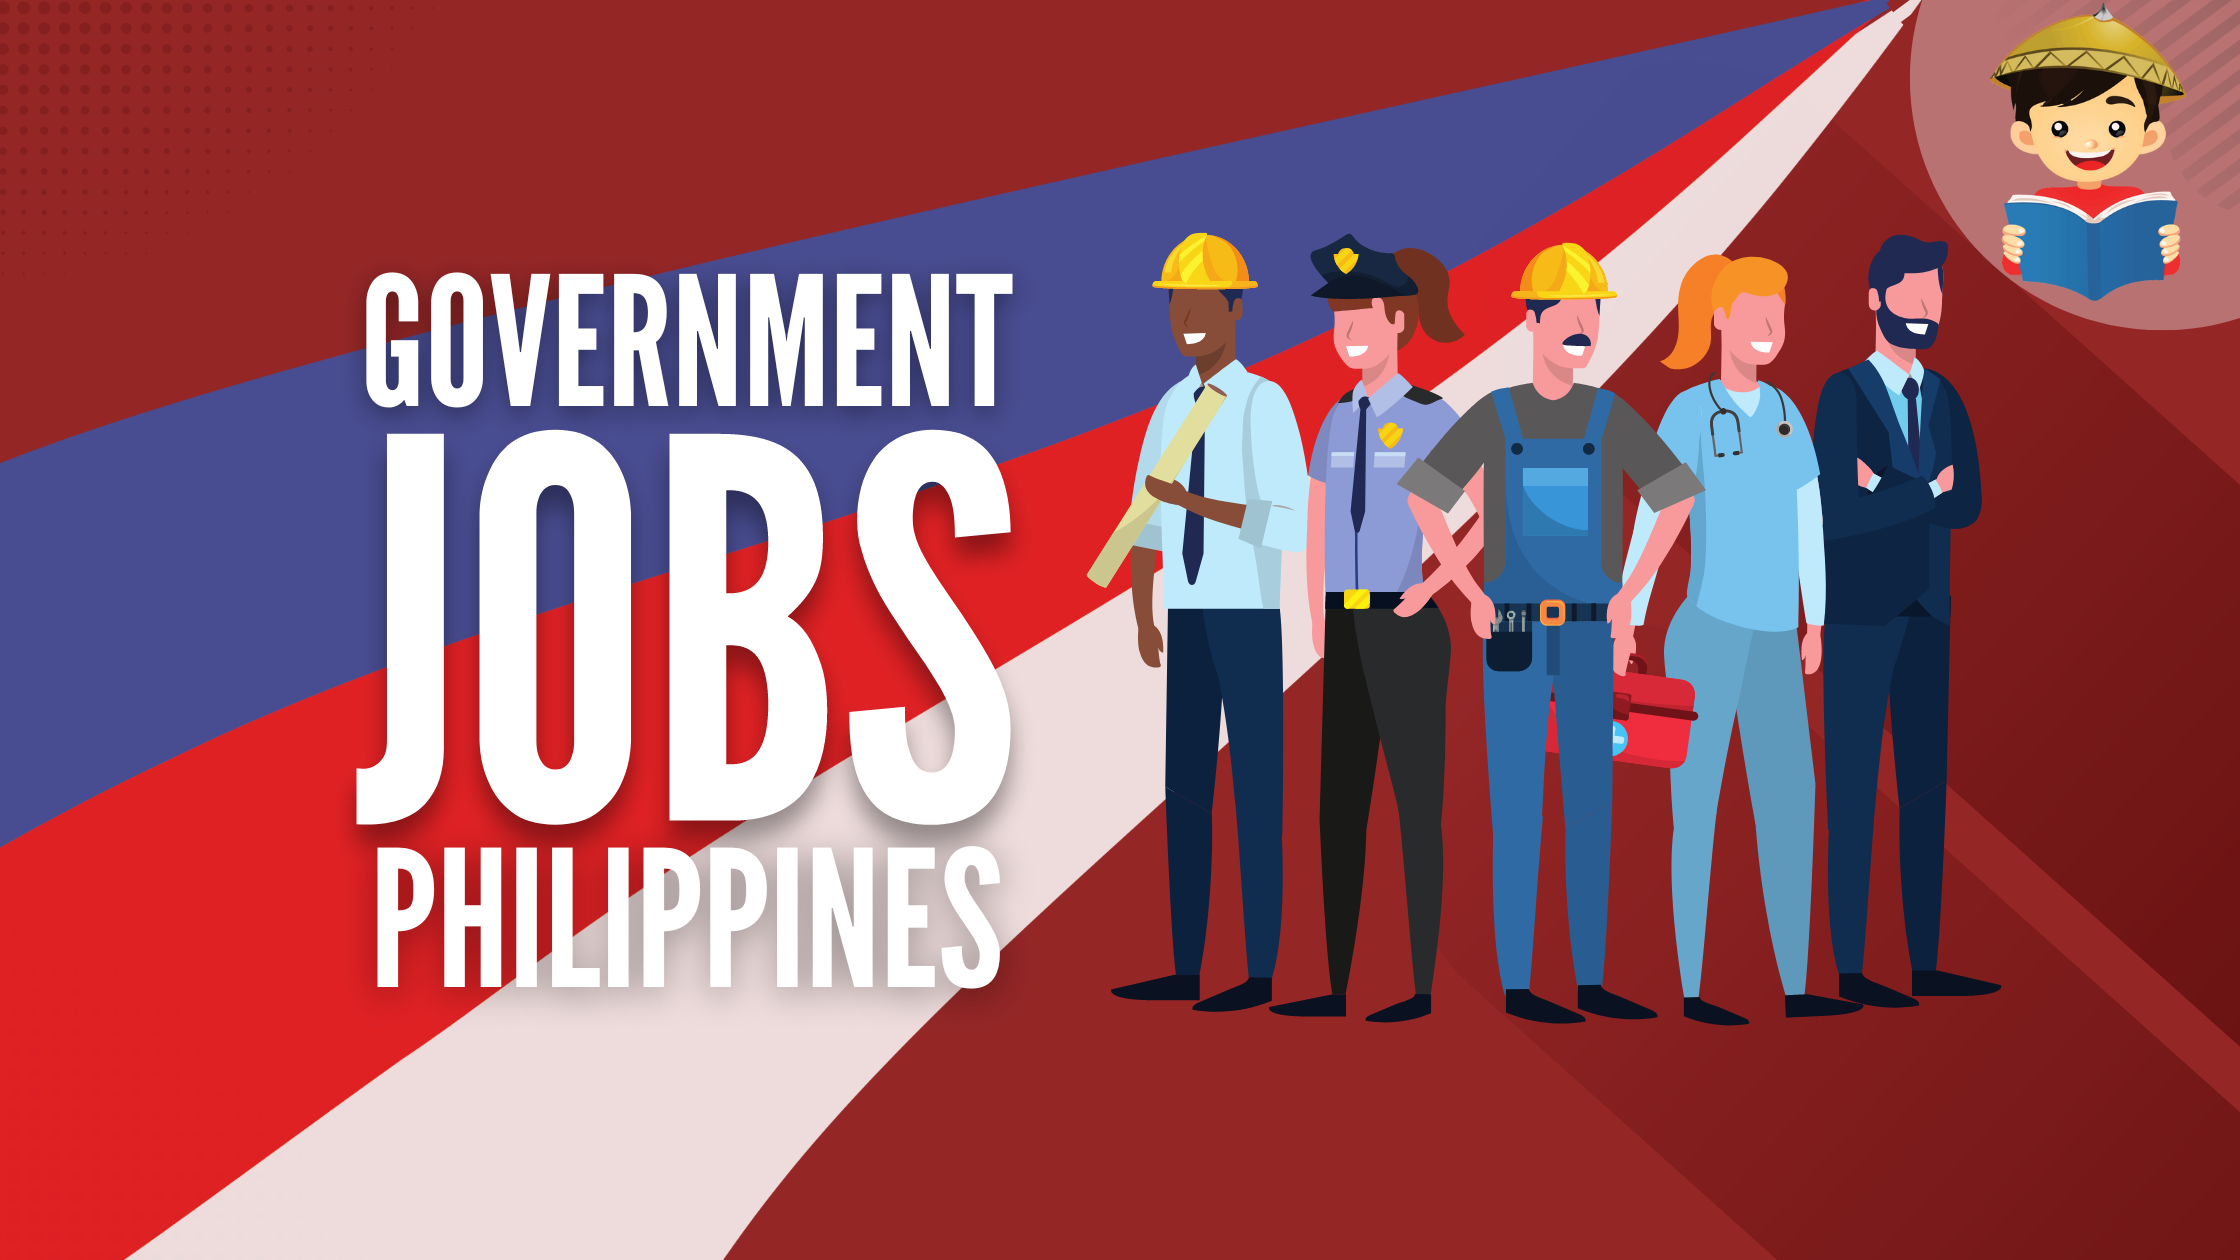 government job vacancies philippines featured image